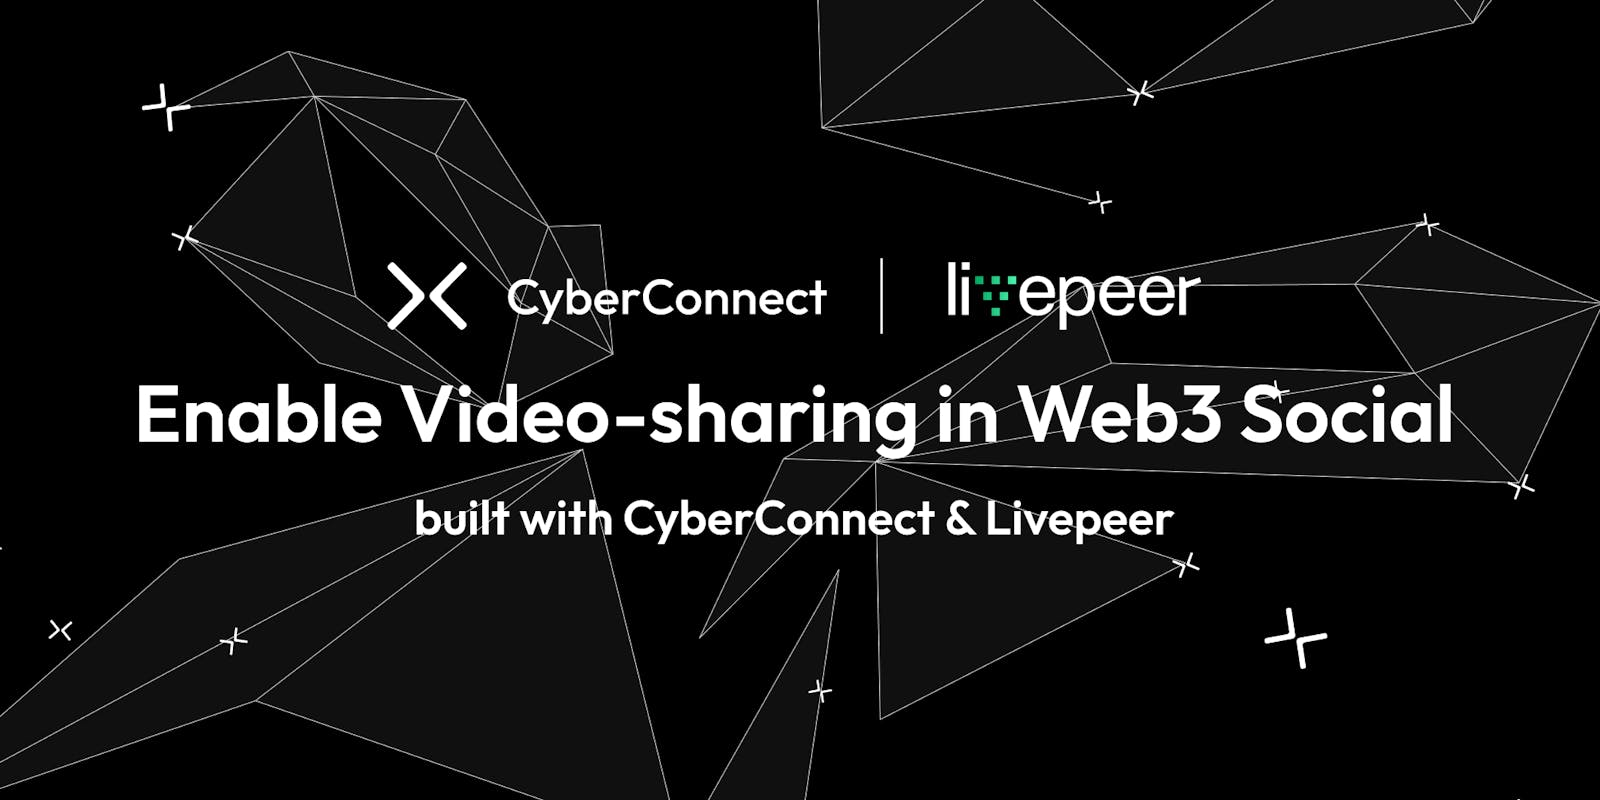 CyberTube: A decentralized video-sharing platform built on CyberConnect using Livepeer